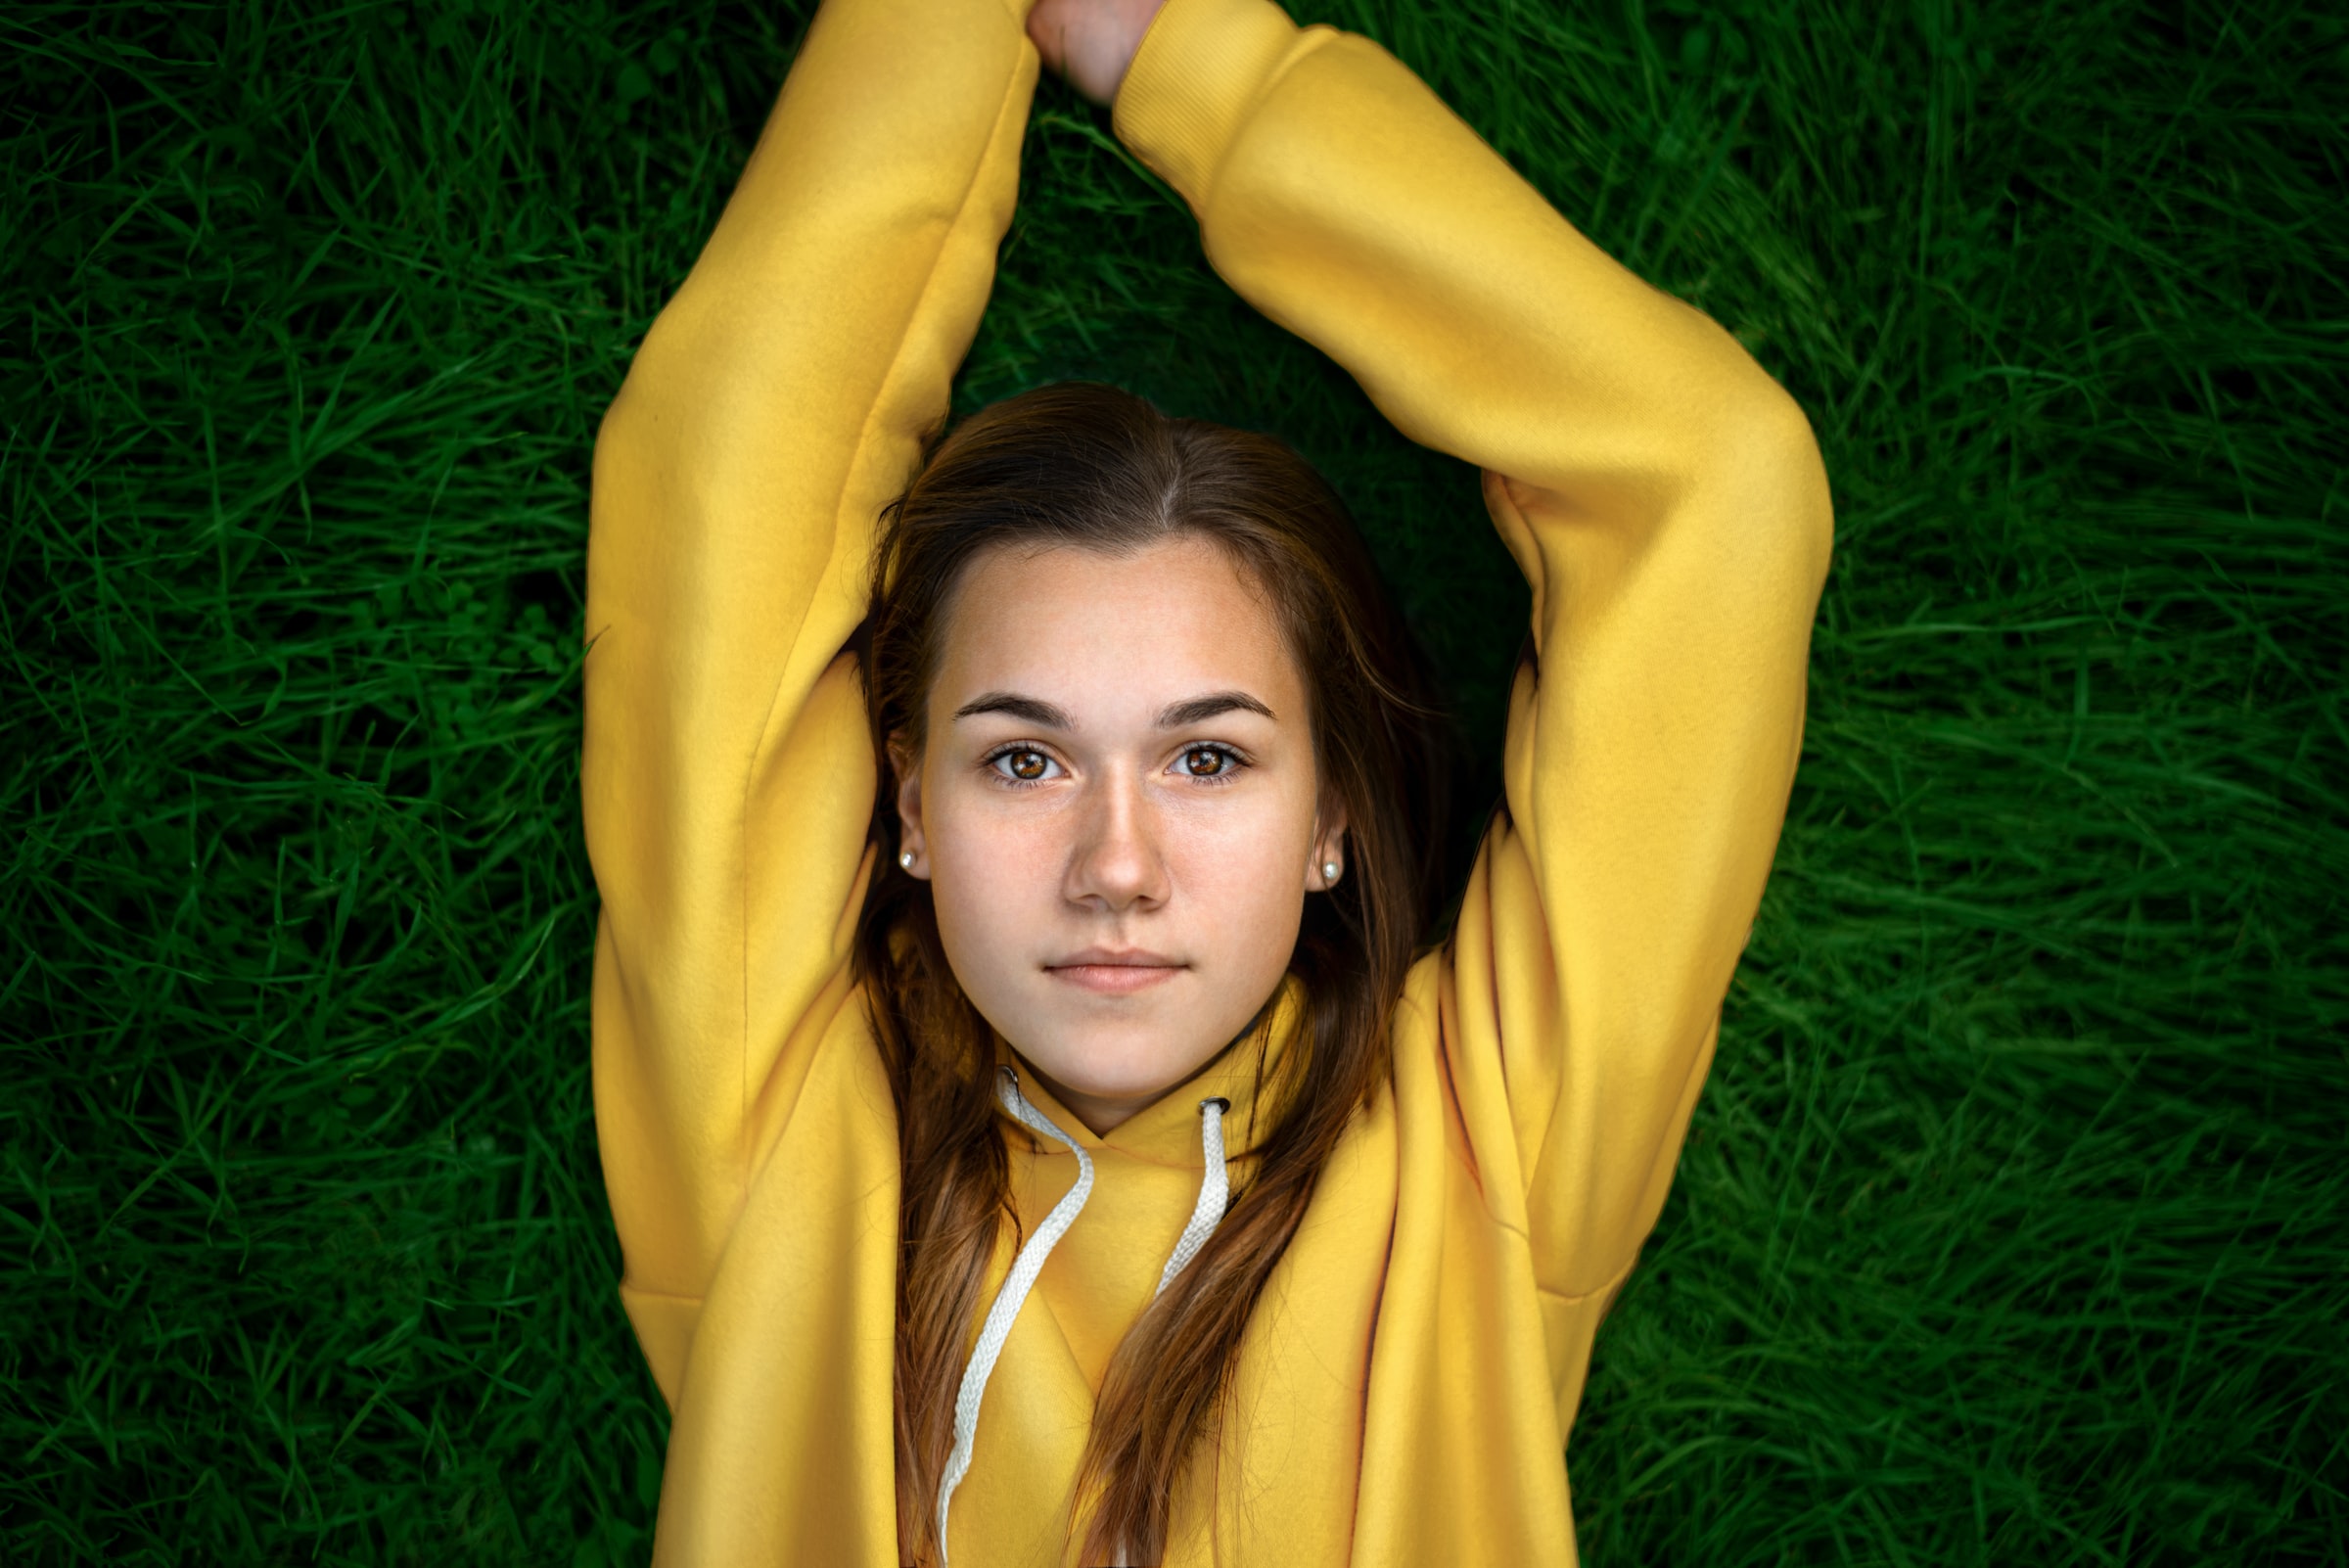 Young woman laying on the grass girl with yellow sweater and hands up lxp lifexpe